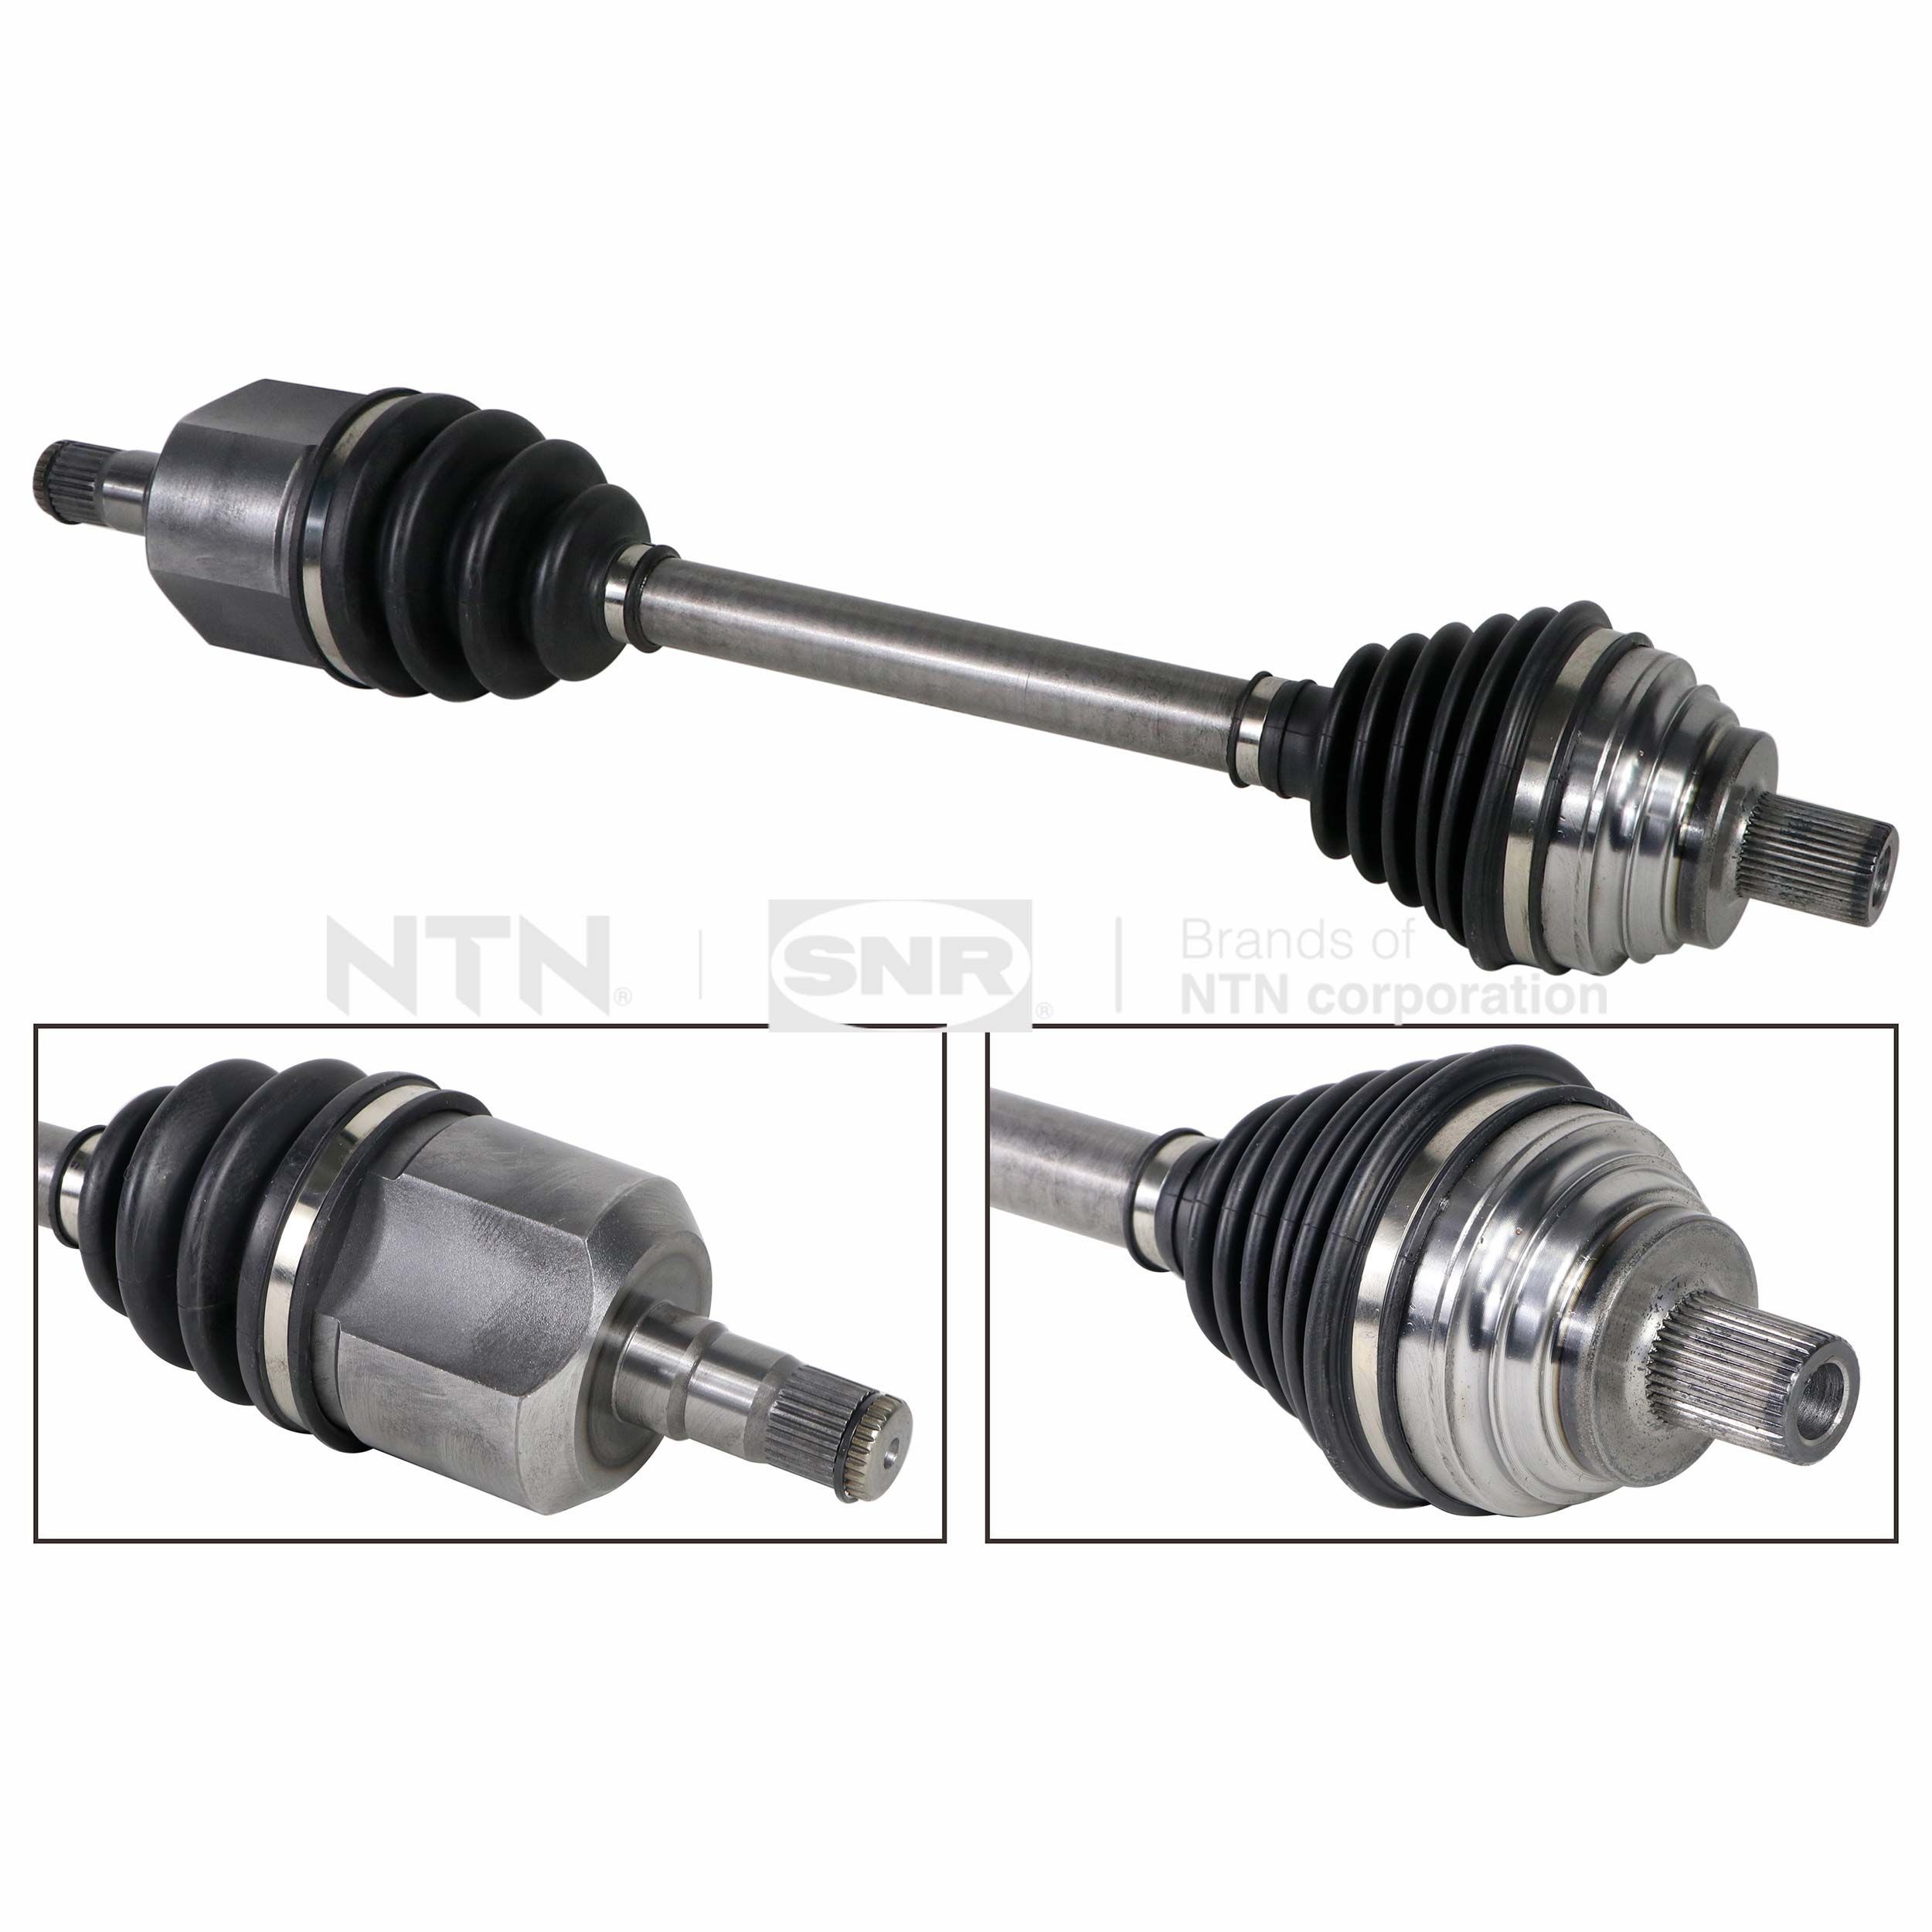 Great value for money - SNR Drive shaft DK54.055